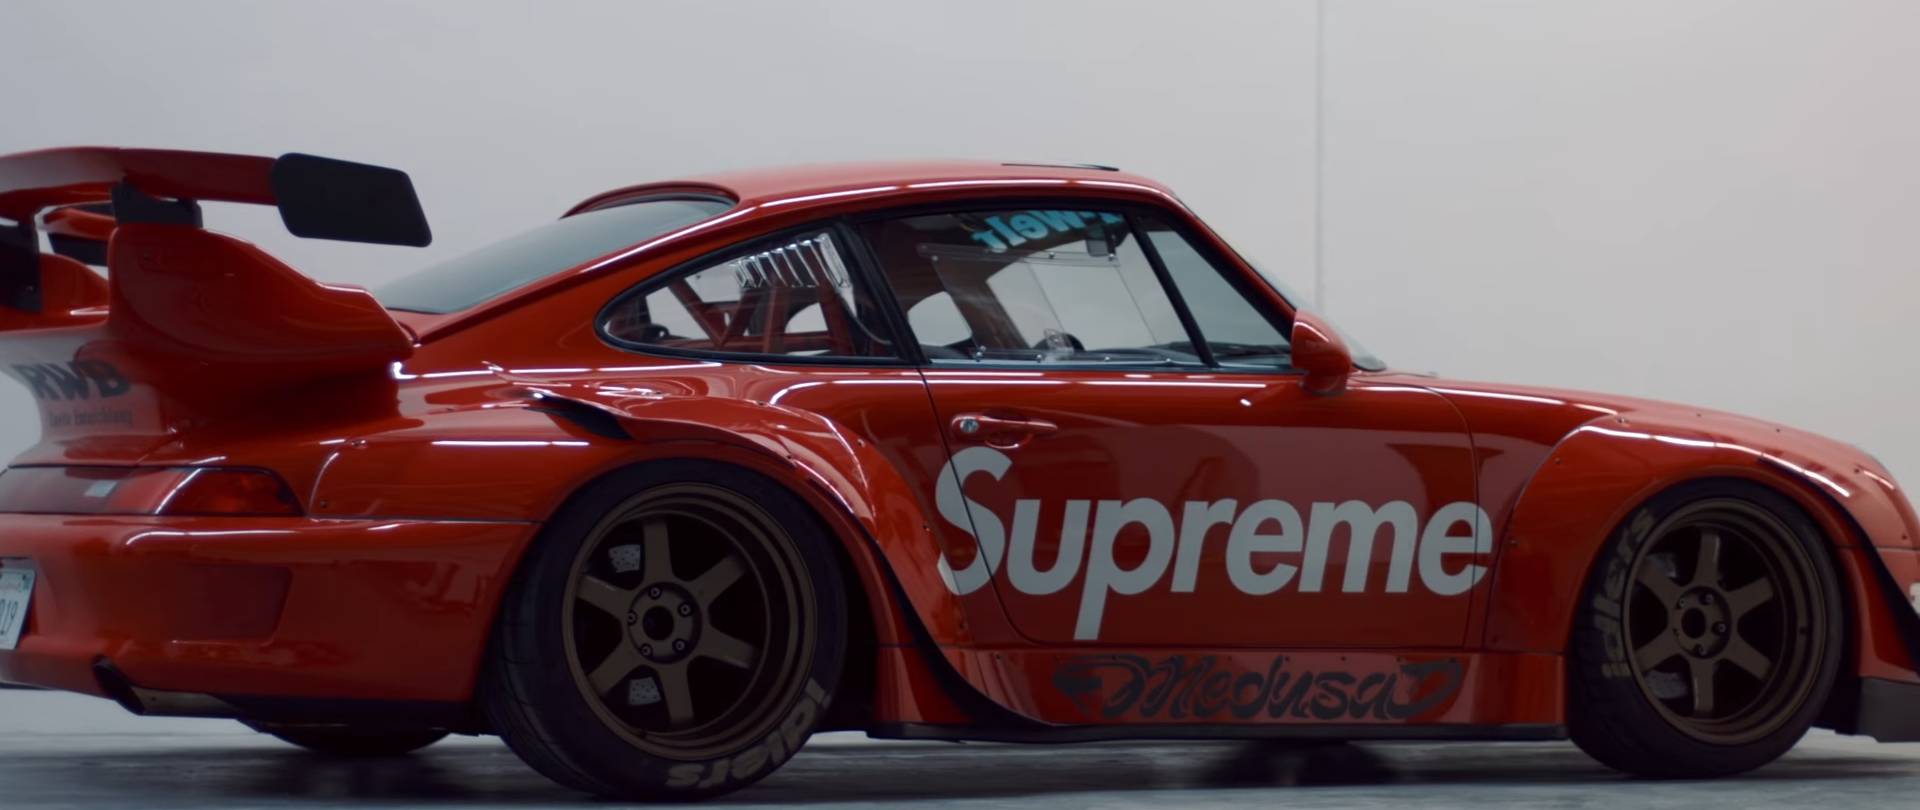 This Is The Supreme Livery Rauh-Welt Porsche That Even RWB Fan Boys Hate